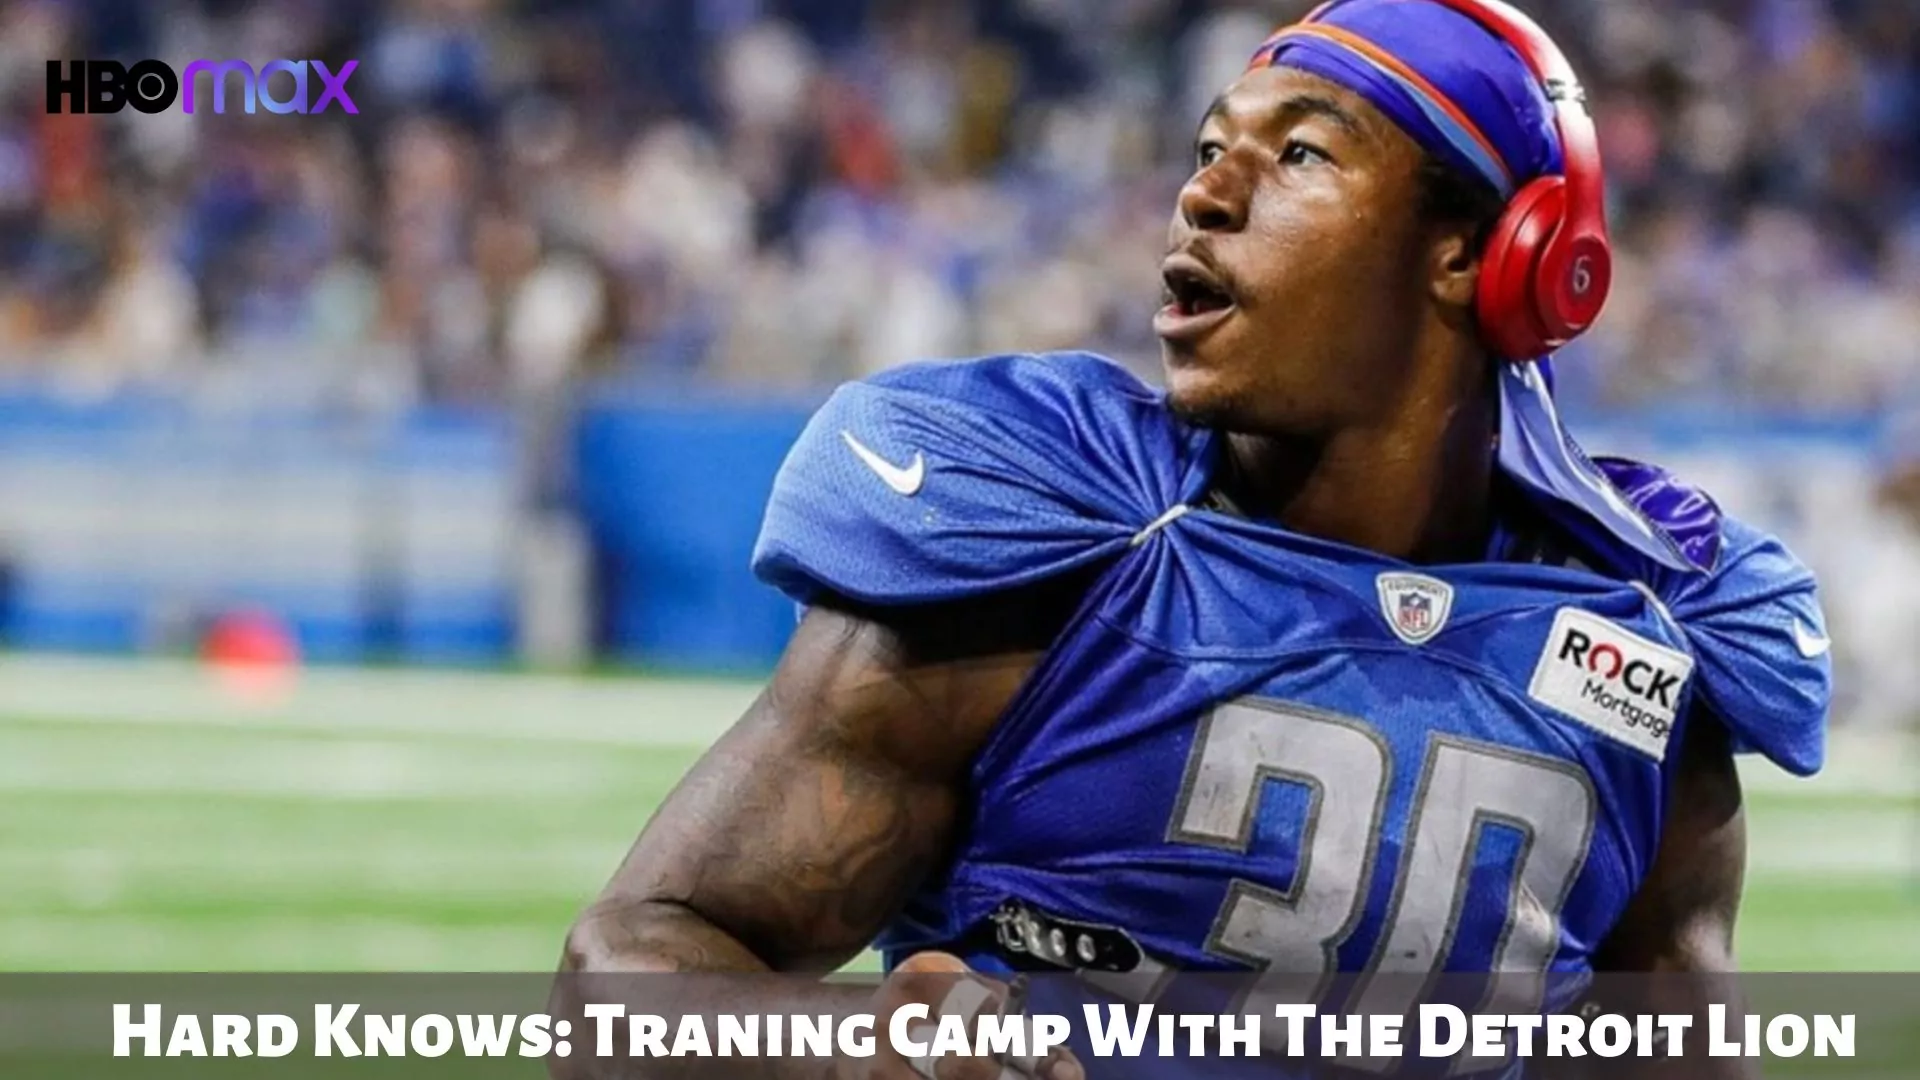 Hard Knows: Traning Camp With The Detroit Lion Parents Guide